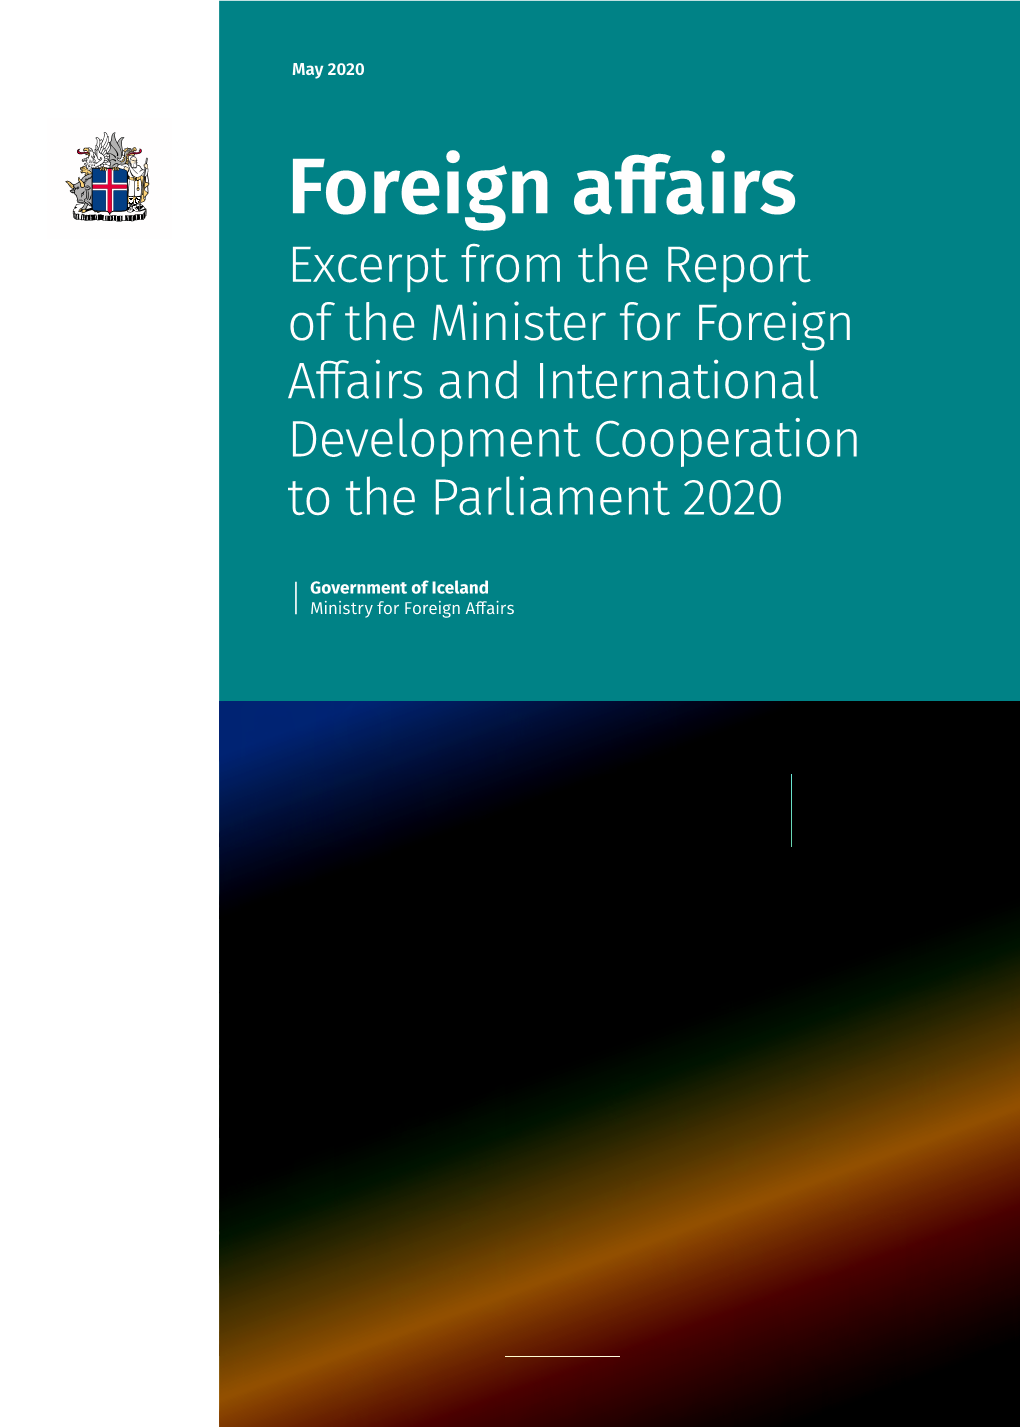 Excerpt from the Report of the Minister for Foreign Affairs and International Development Cooperation to the Parliament 2020